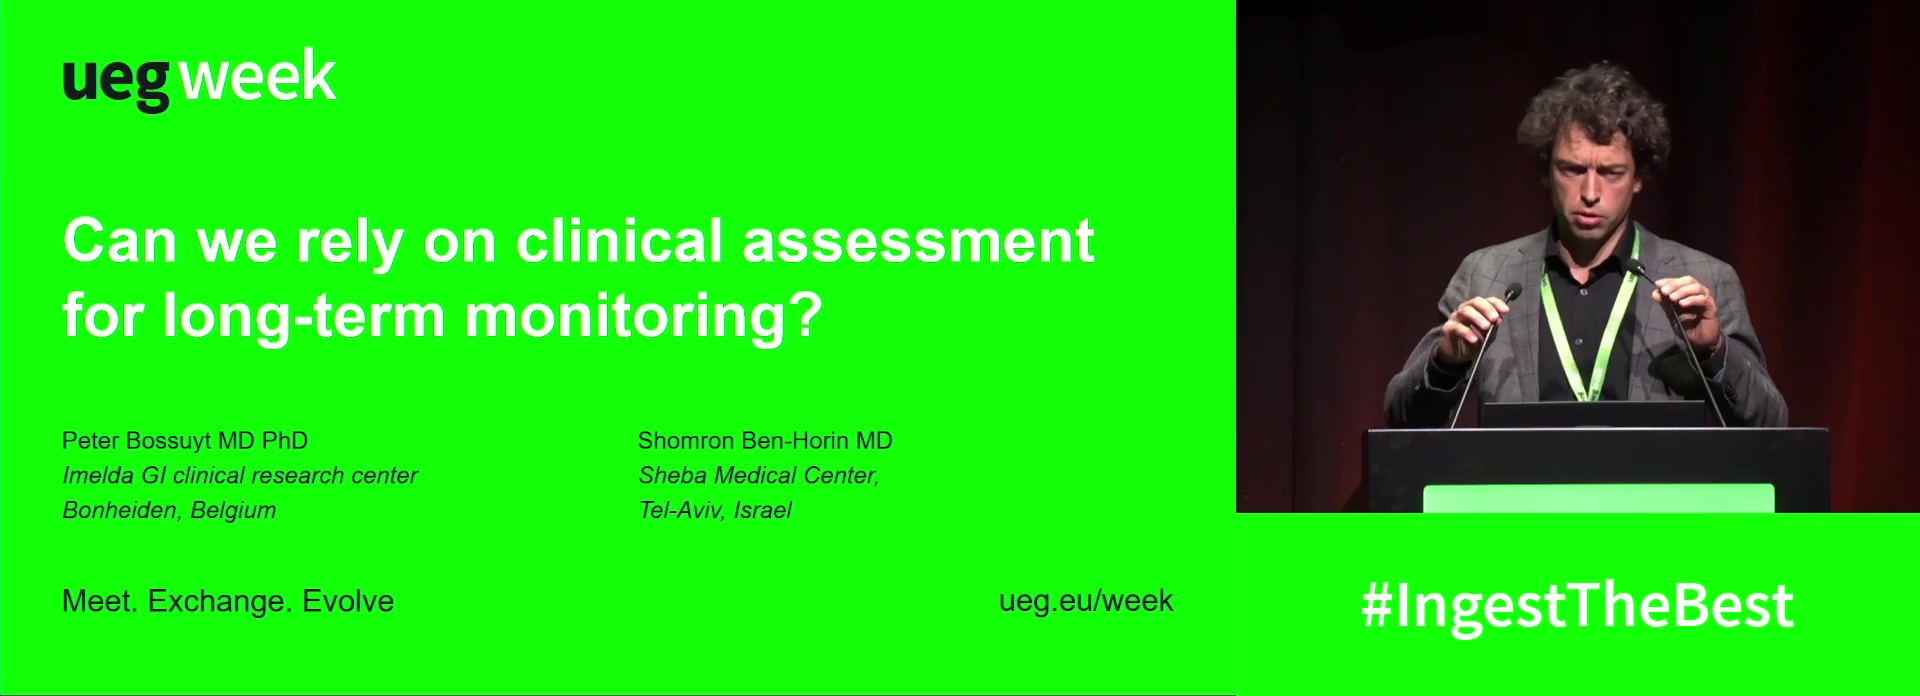 Can we rely on clinical assessment for long-term monitoring? Yes and no